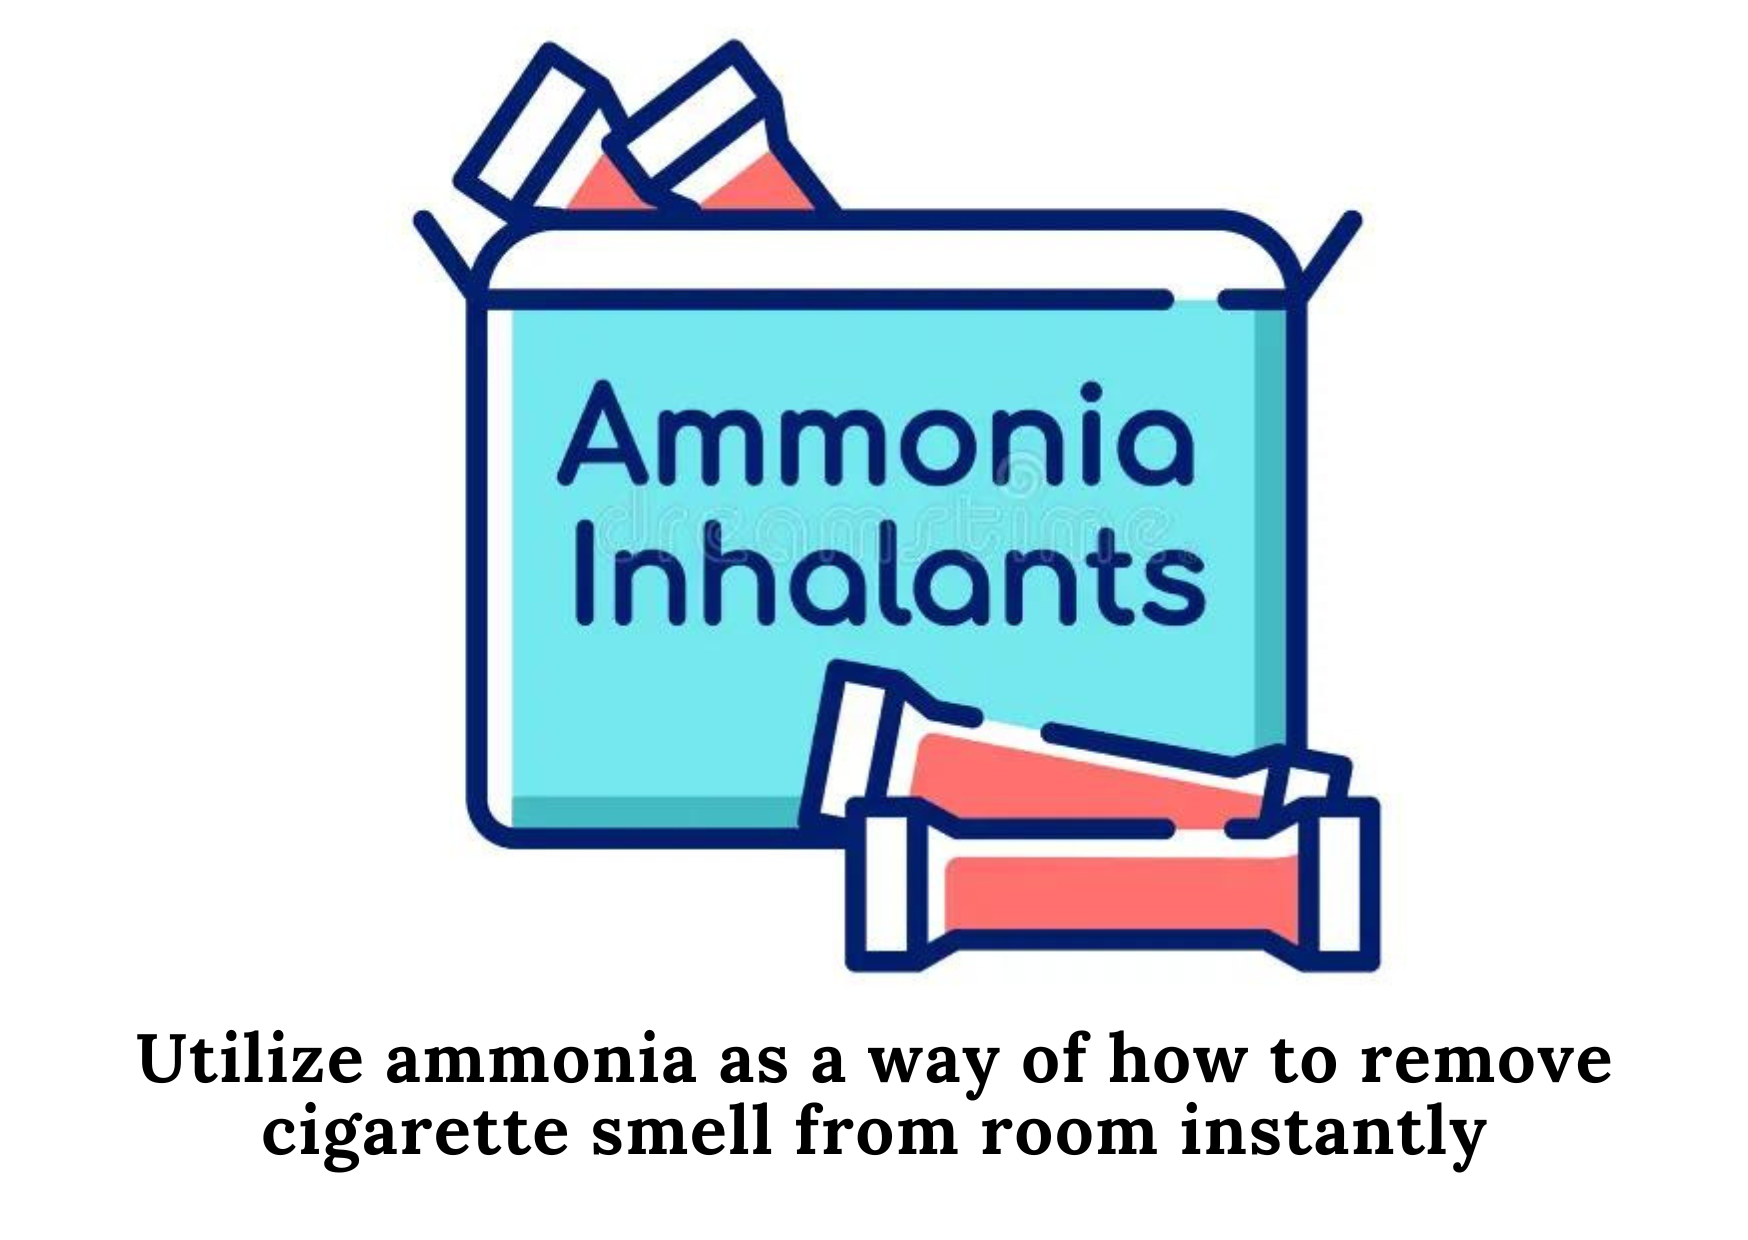 4. Utilize ammonia as a way of how to remove cigarette smell from room instantly